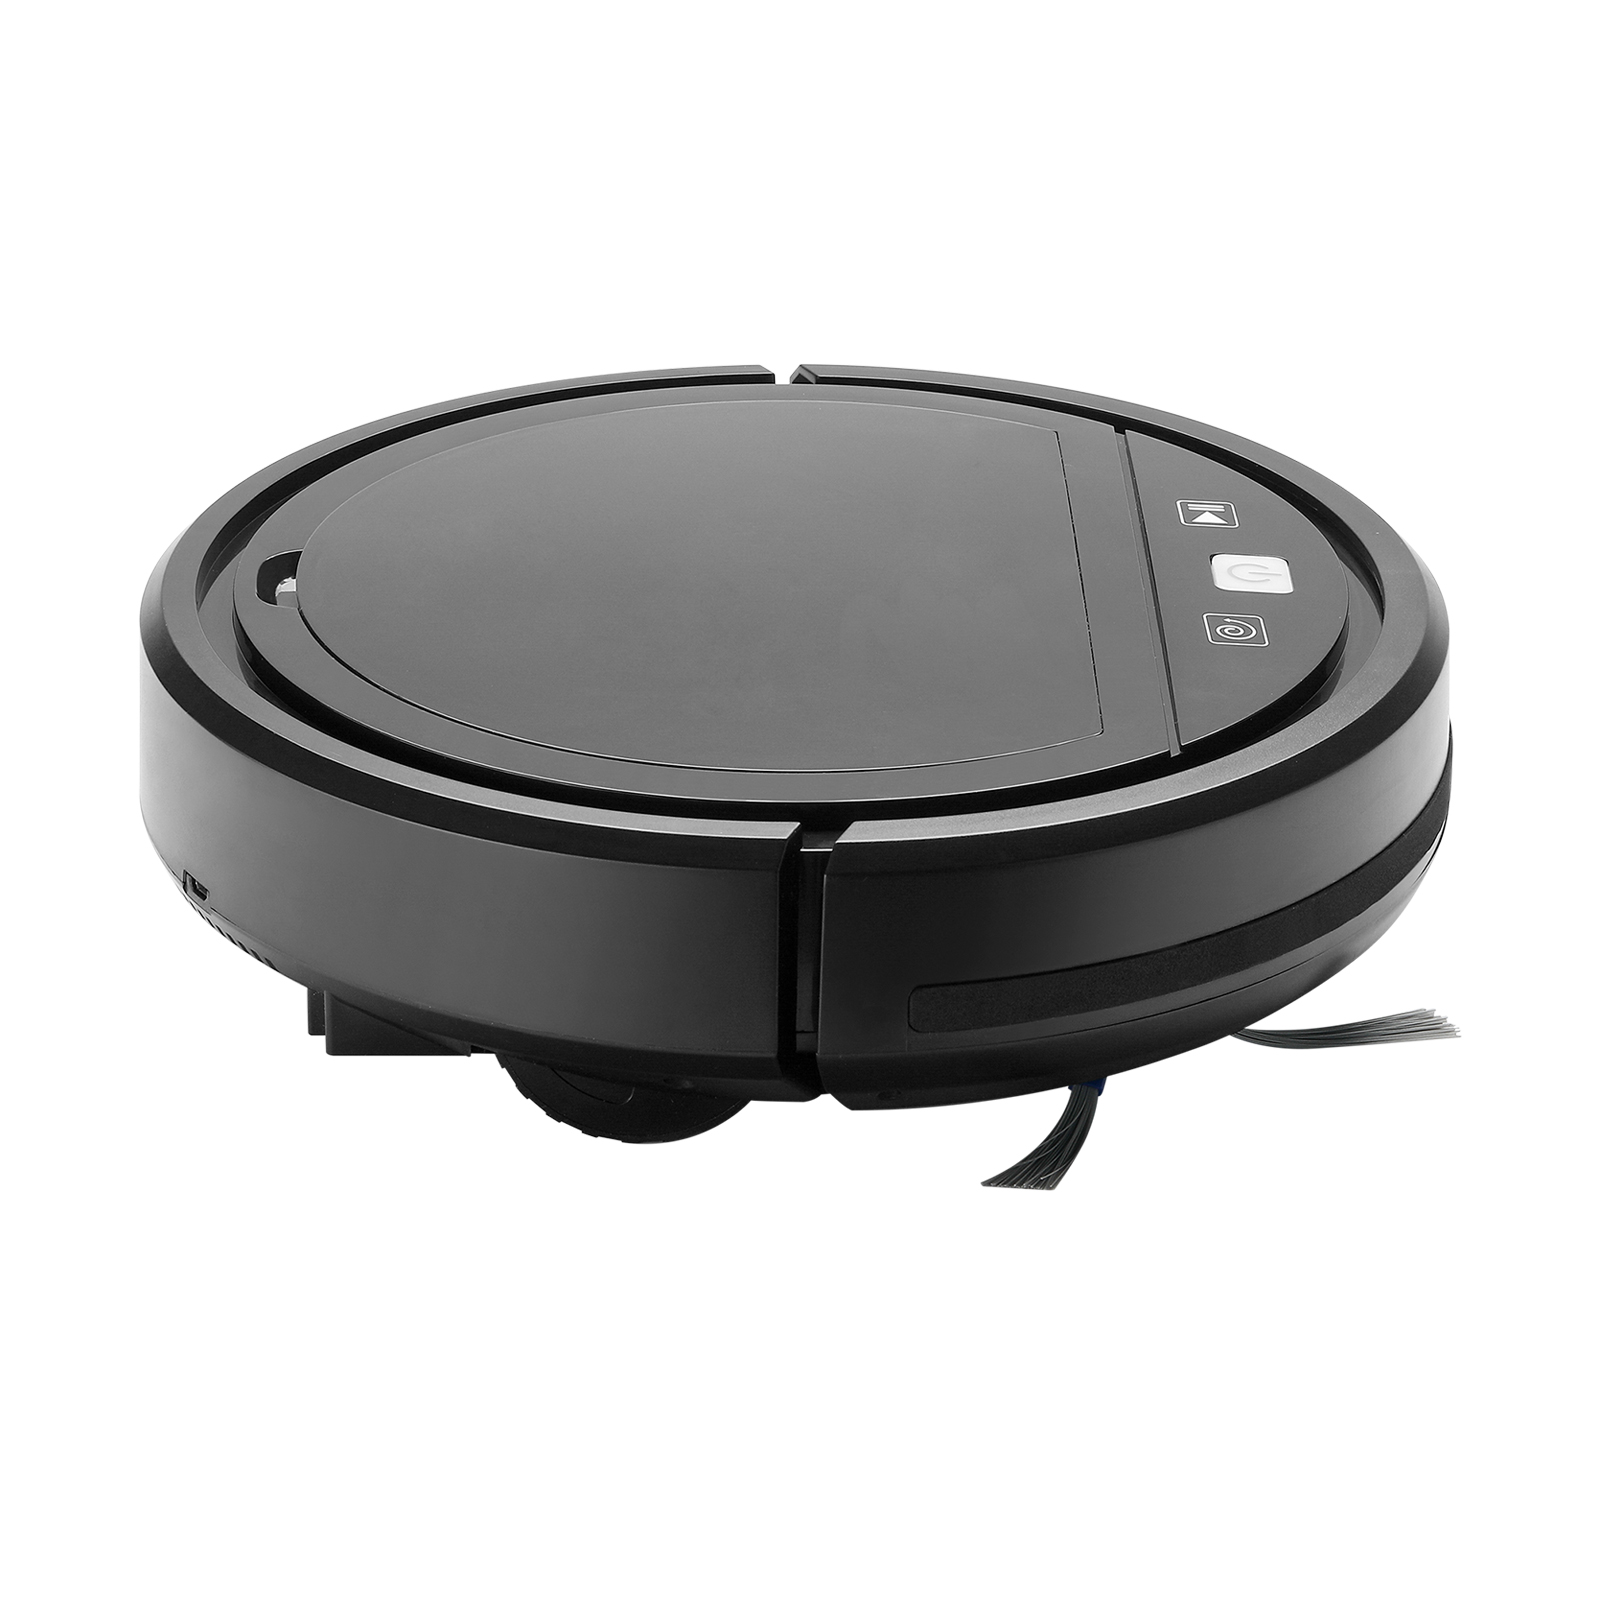 WIFI 3-In-1 Robotic Cleaner 1500Pa Powerful Suction Robot Vacuum Cleaner 4 Mode Compatible with Alexa Google Assitant Tuya App